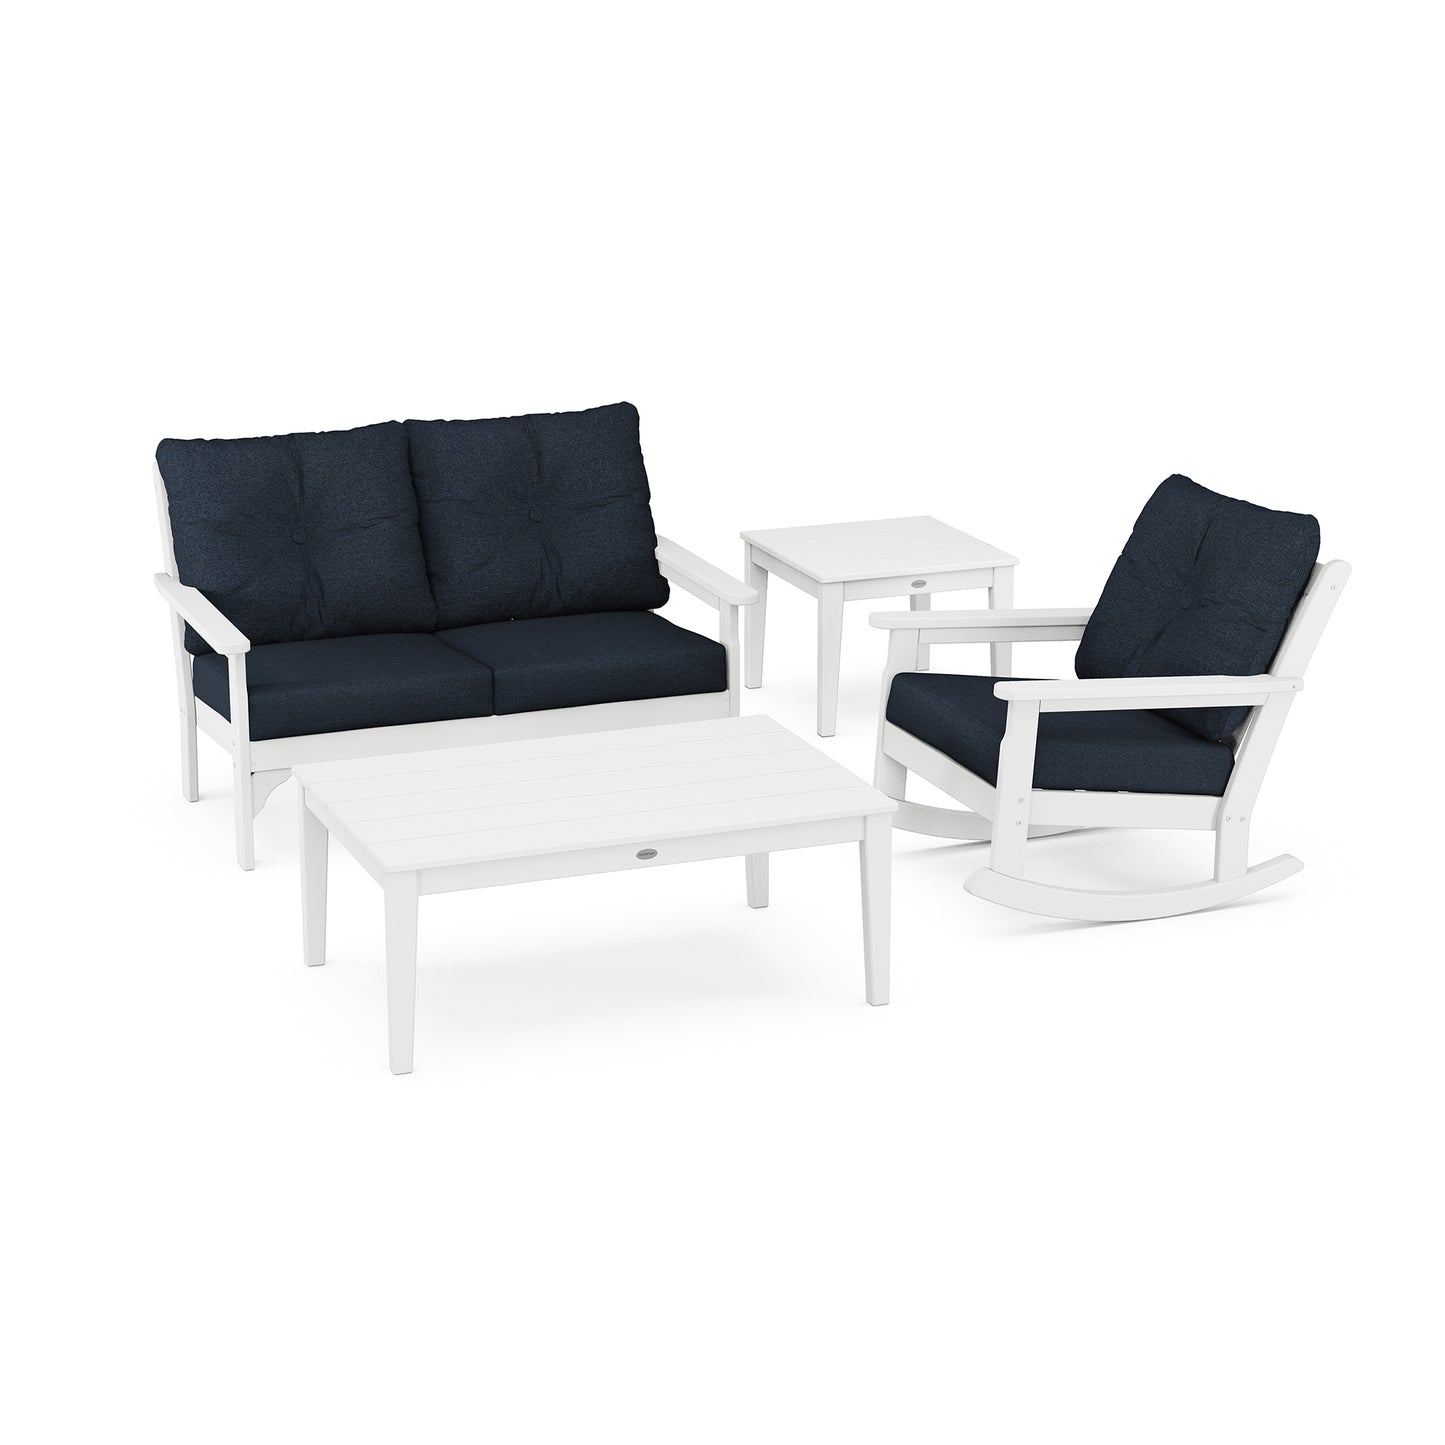 A modern POLYWOOD Vineyard 4-Piece Deep Seating Rocker Set on a white background, including a white sofa with navy blue cushions, two matching armchairs, and a rectangular coffee table.